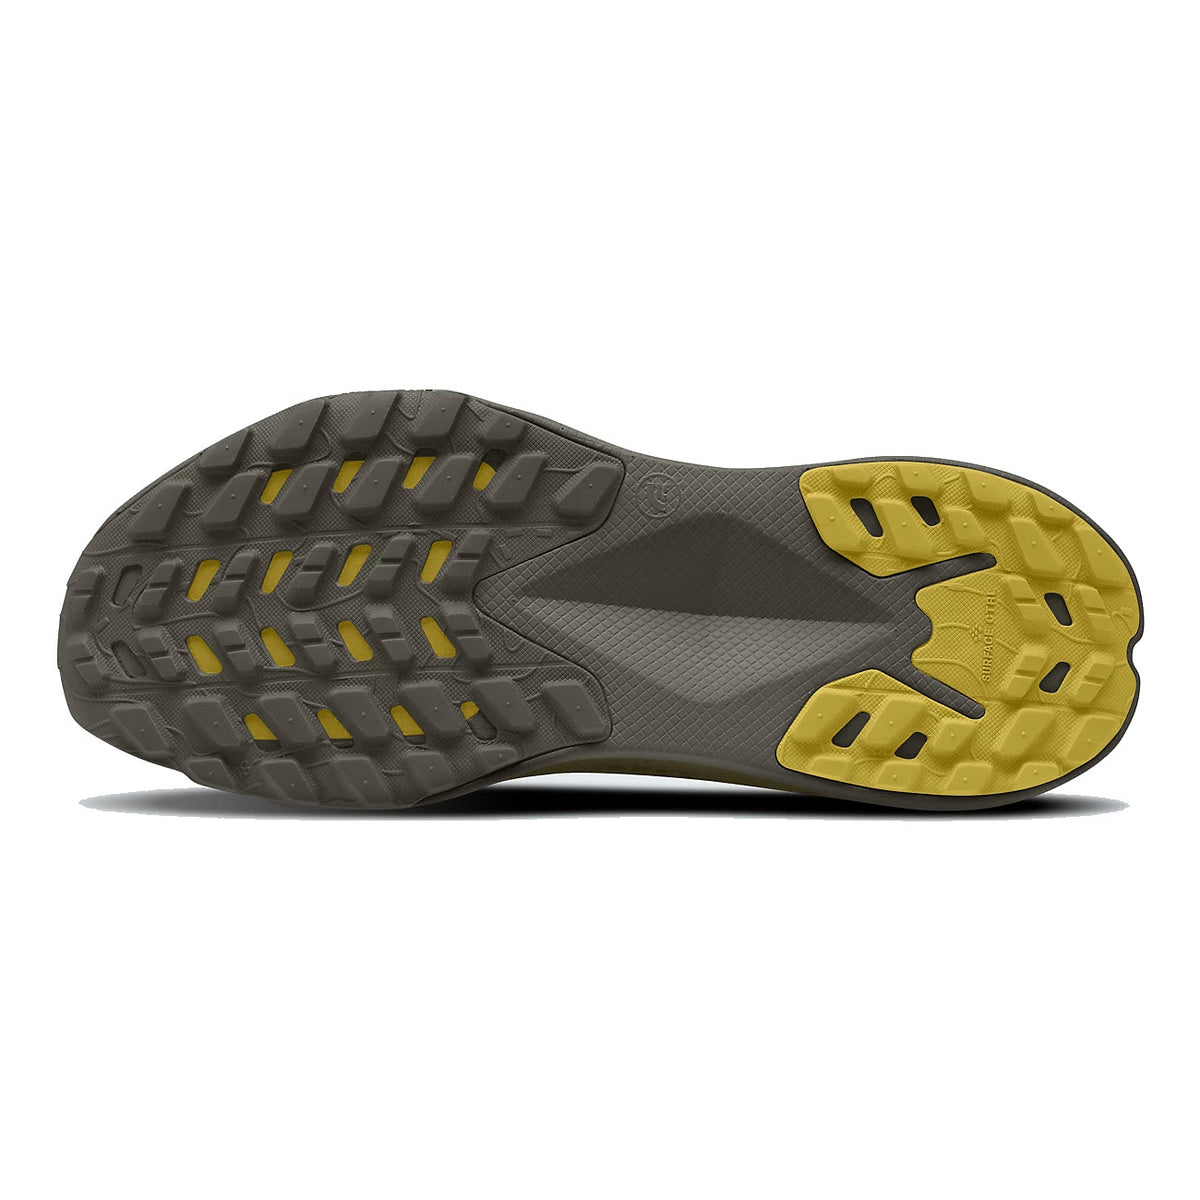 Sole of a North Face trail-running shoe with gray base and distinct yellow traction pads, showing tread pattern optimized for grip on rugged surfaces.